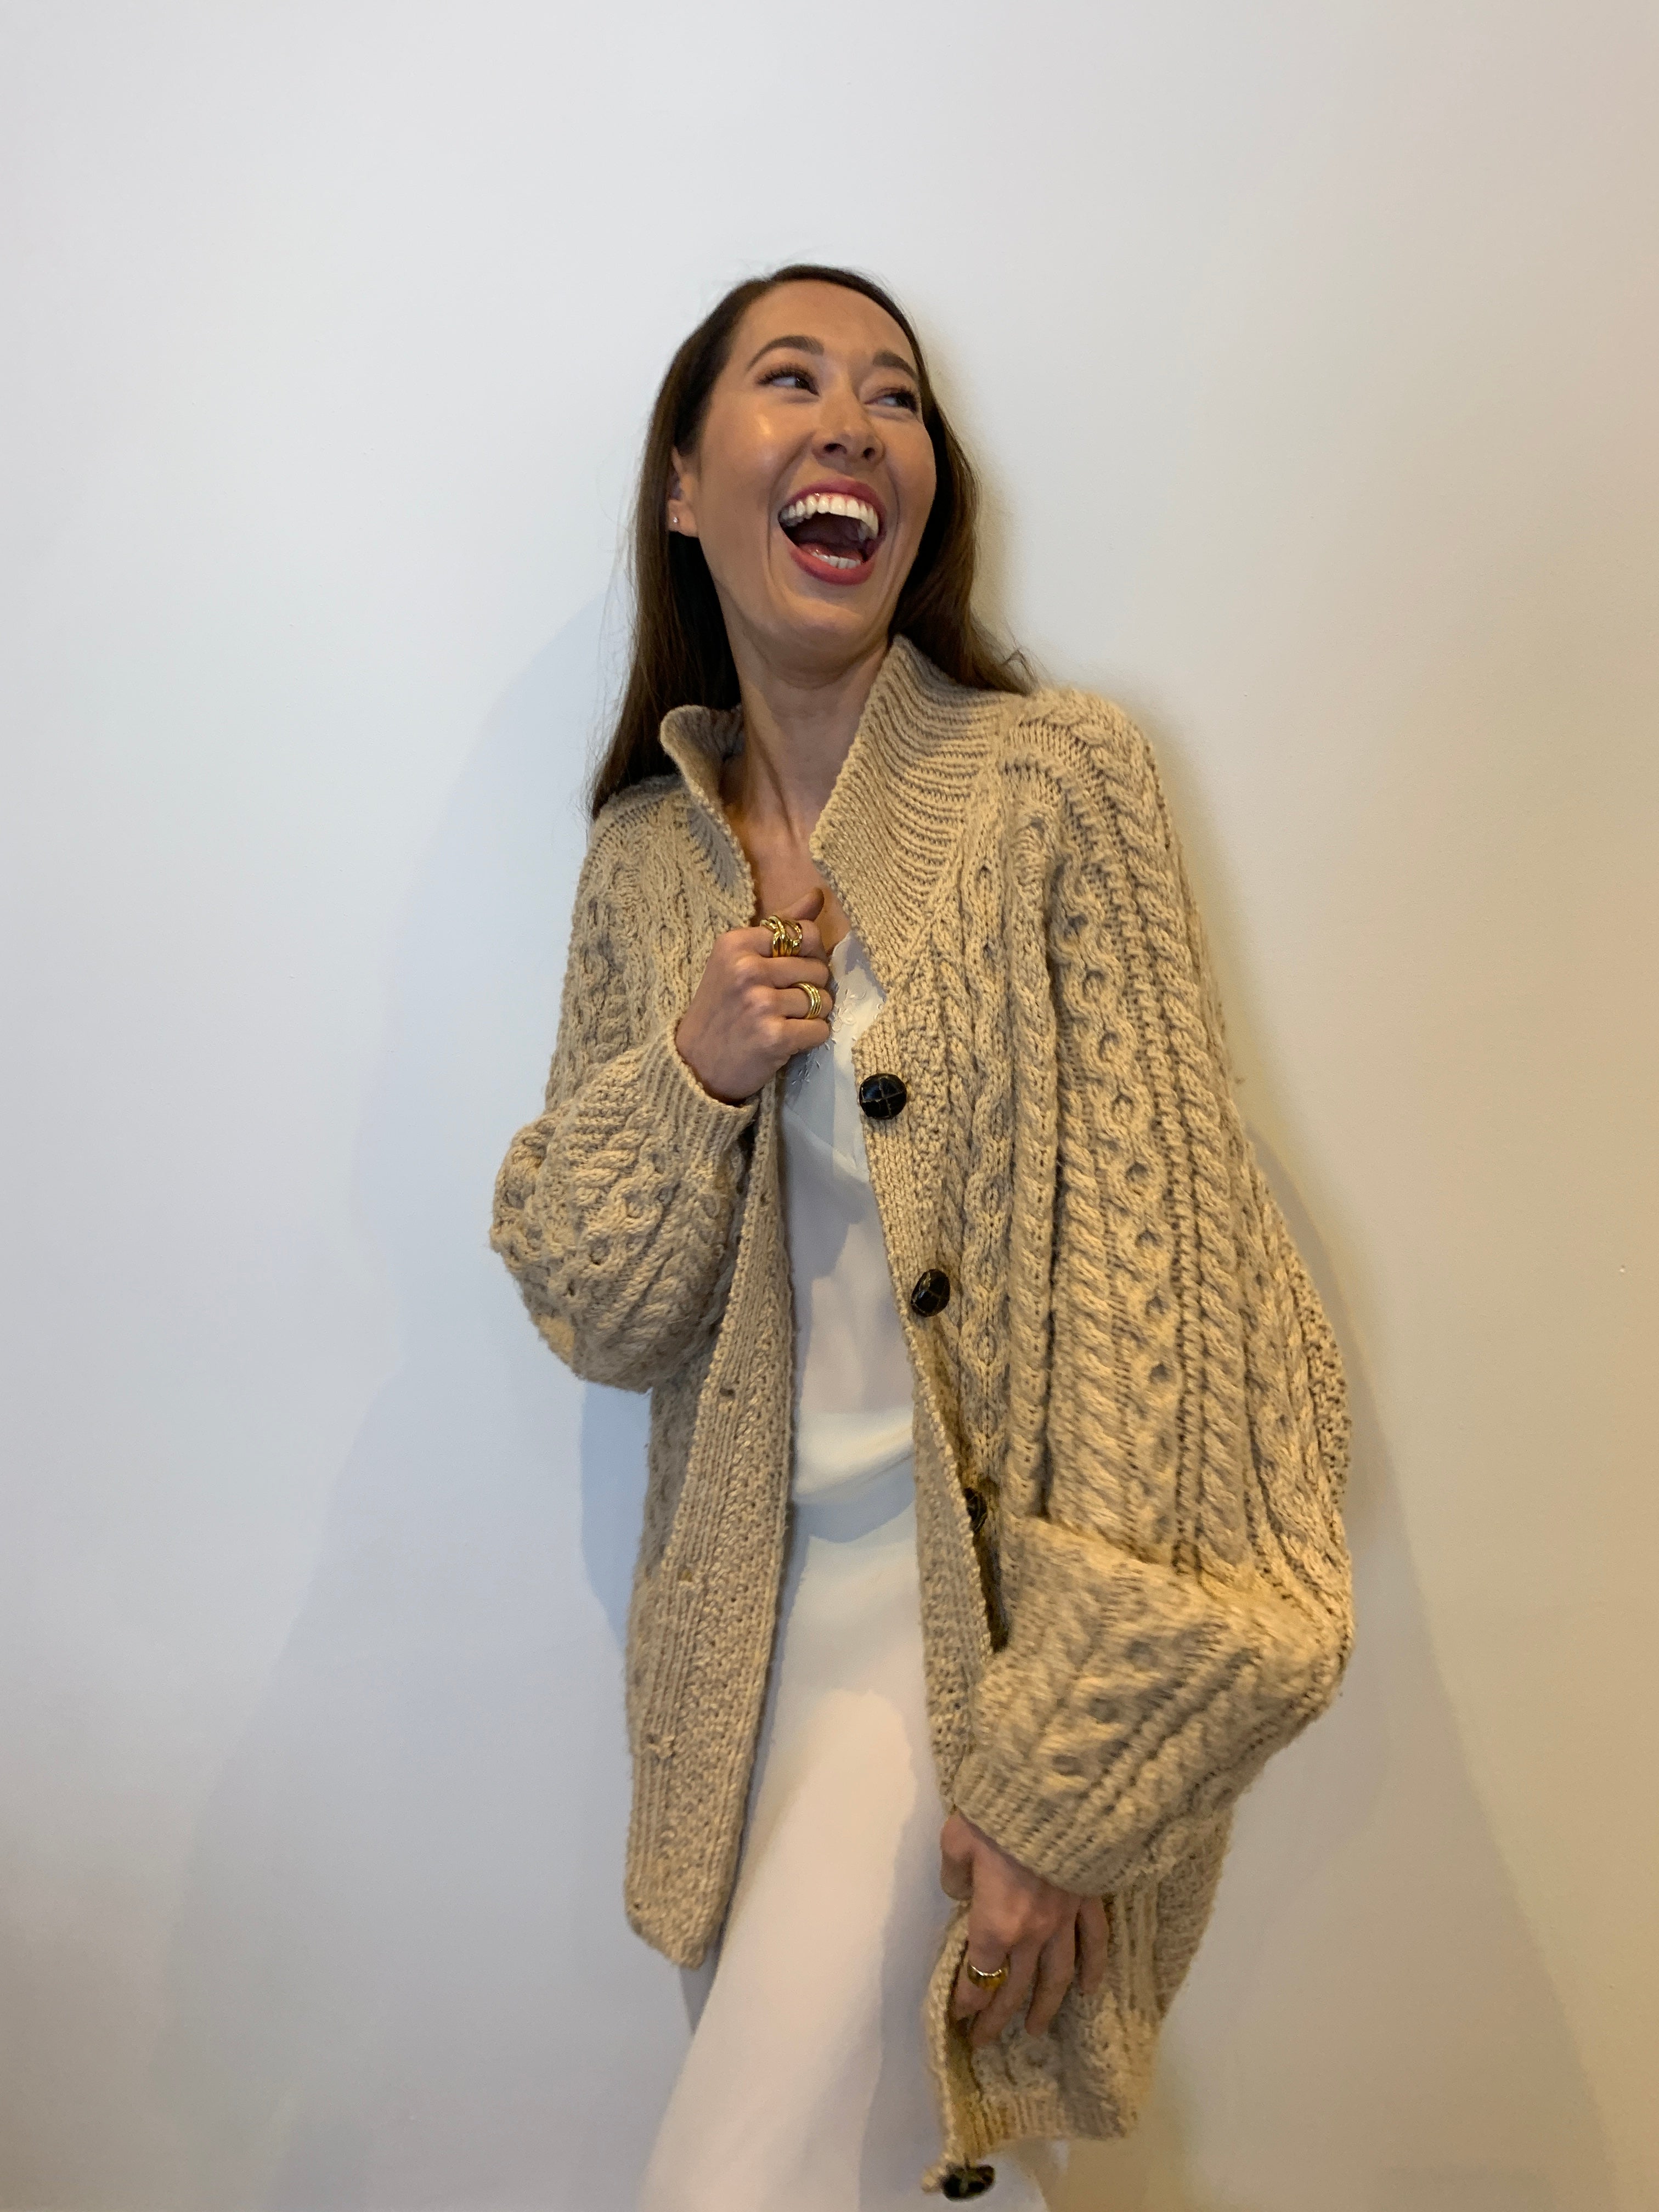 Chunky Vintage hand knitted oversized cardigan